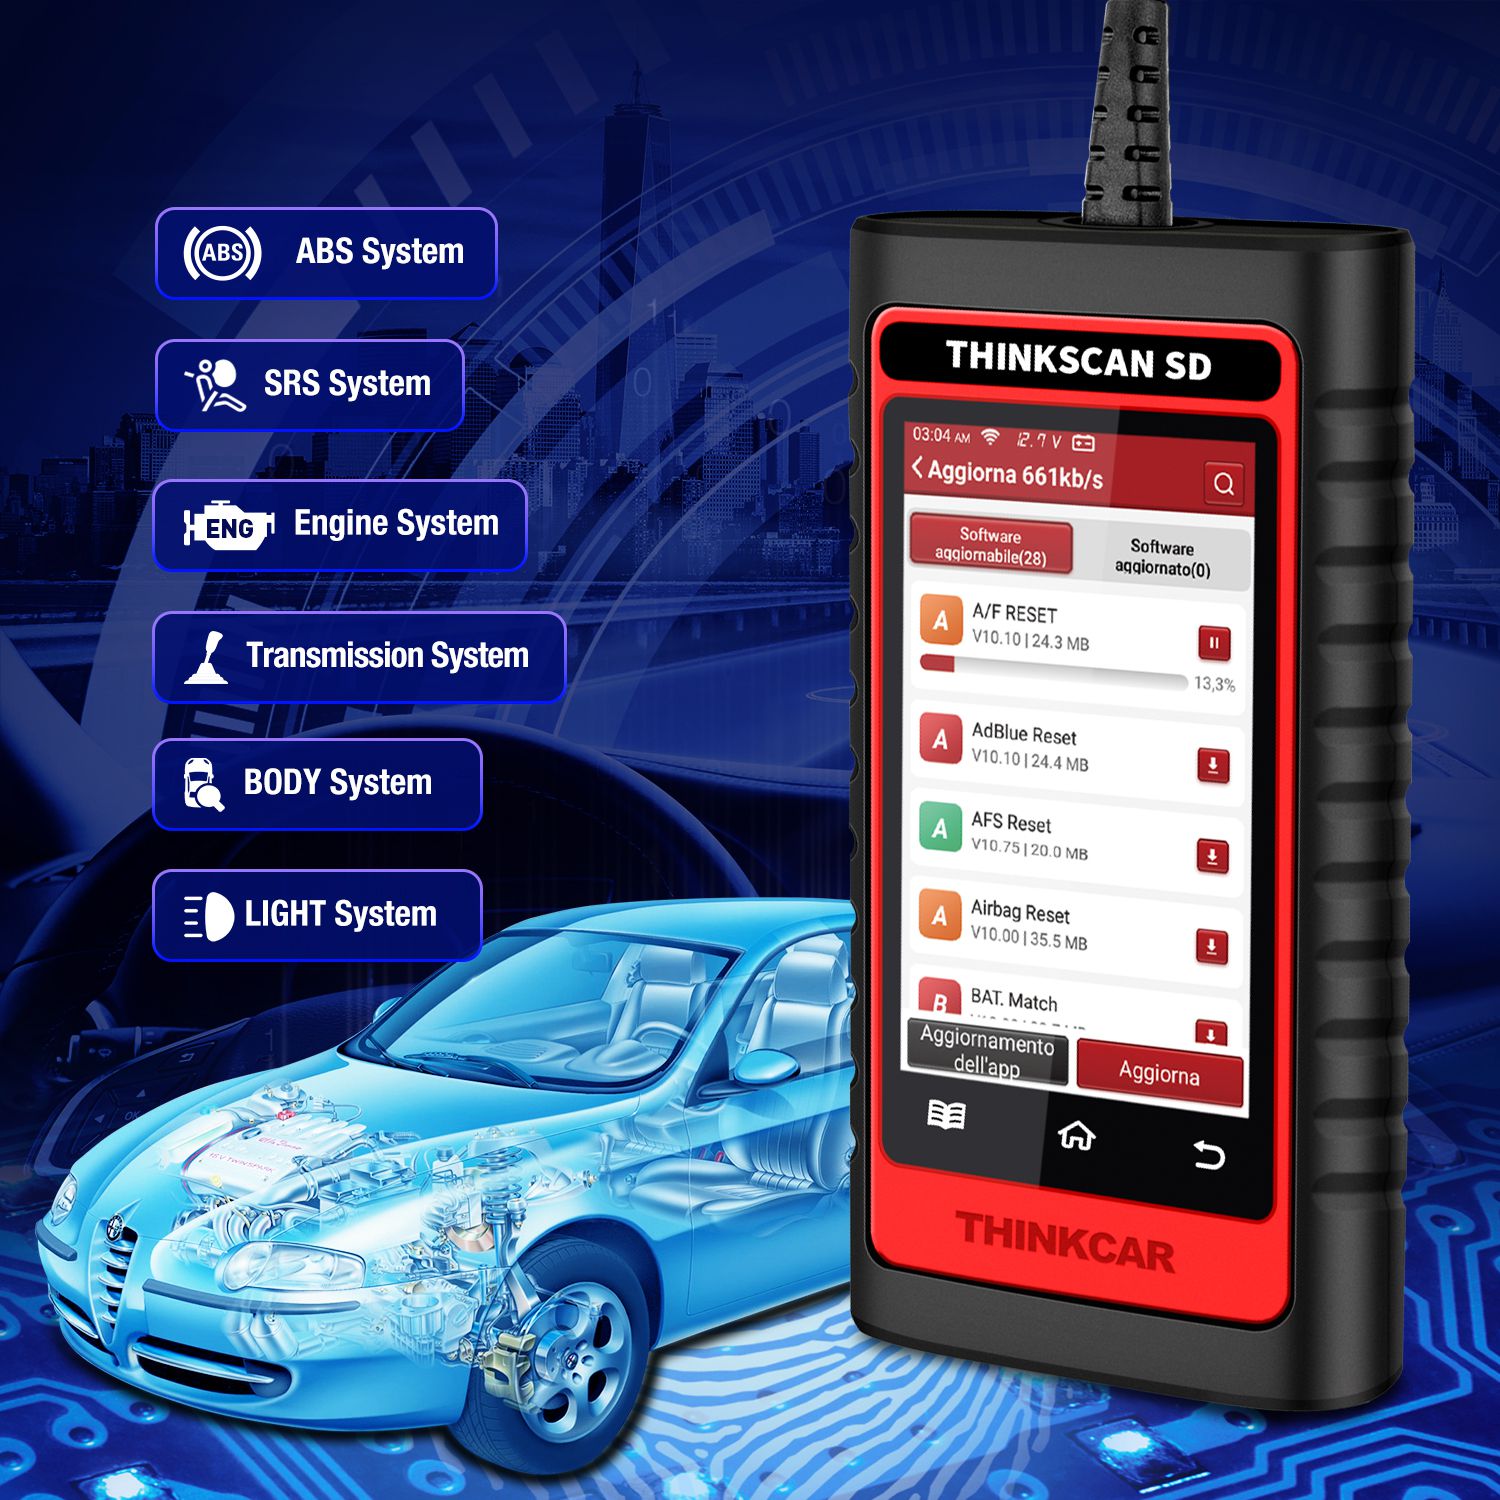 THINKCAR Thinkscan SD2 OBD2 Automotive Scanner ABS SRS Professionelle Diagnosewerkzeuge Alle System Free UpdateCode Reader